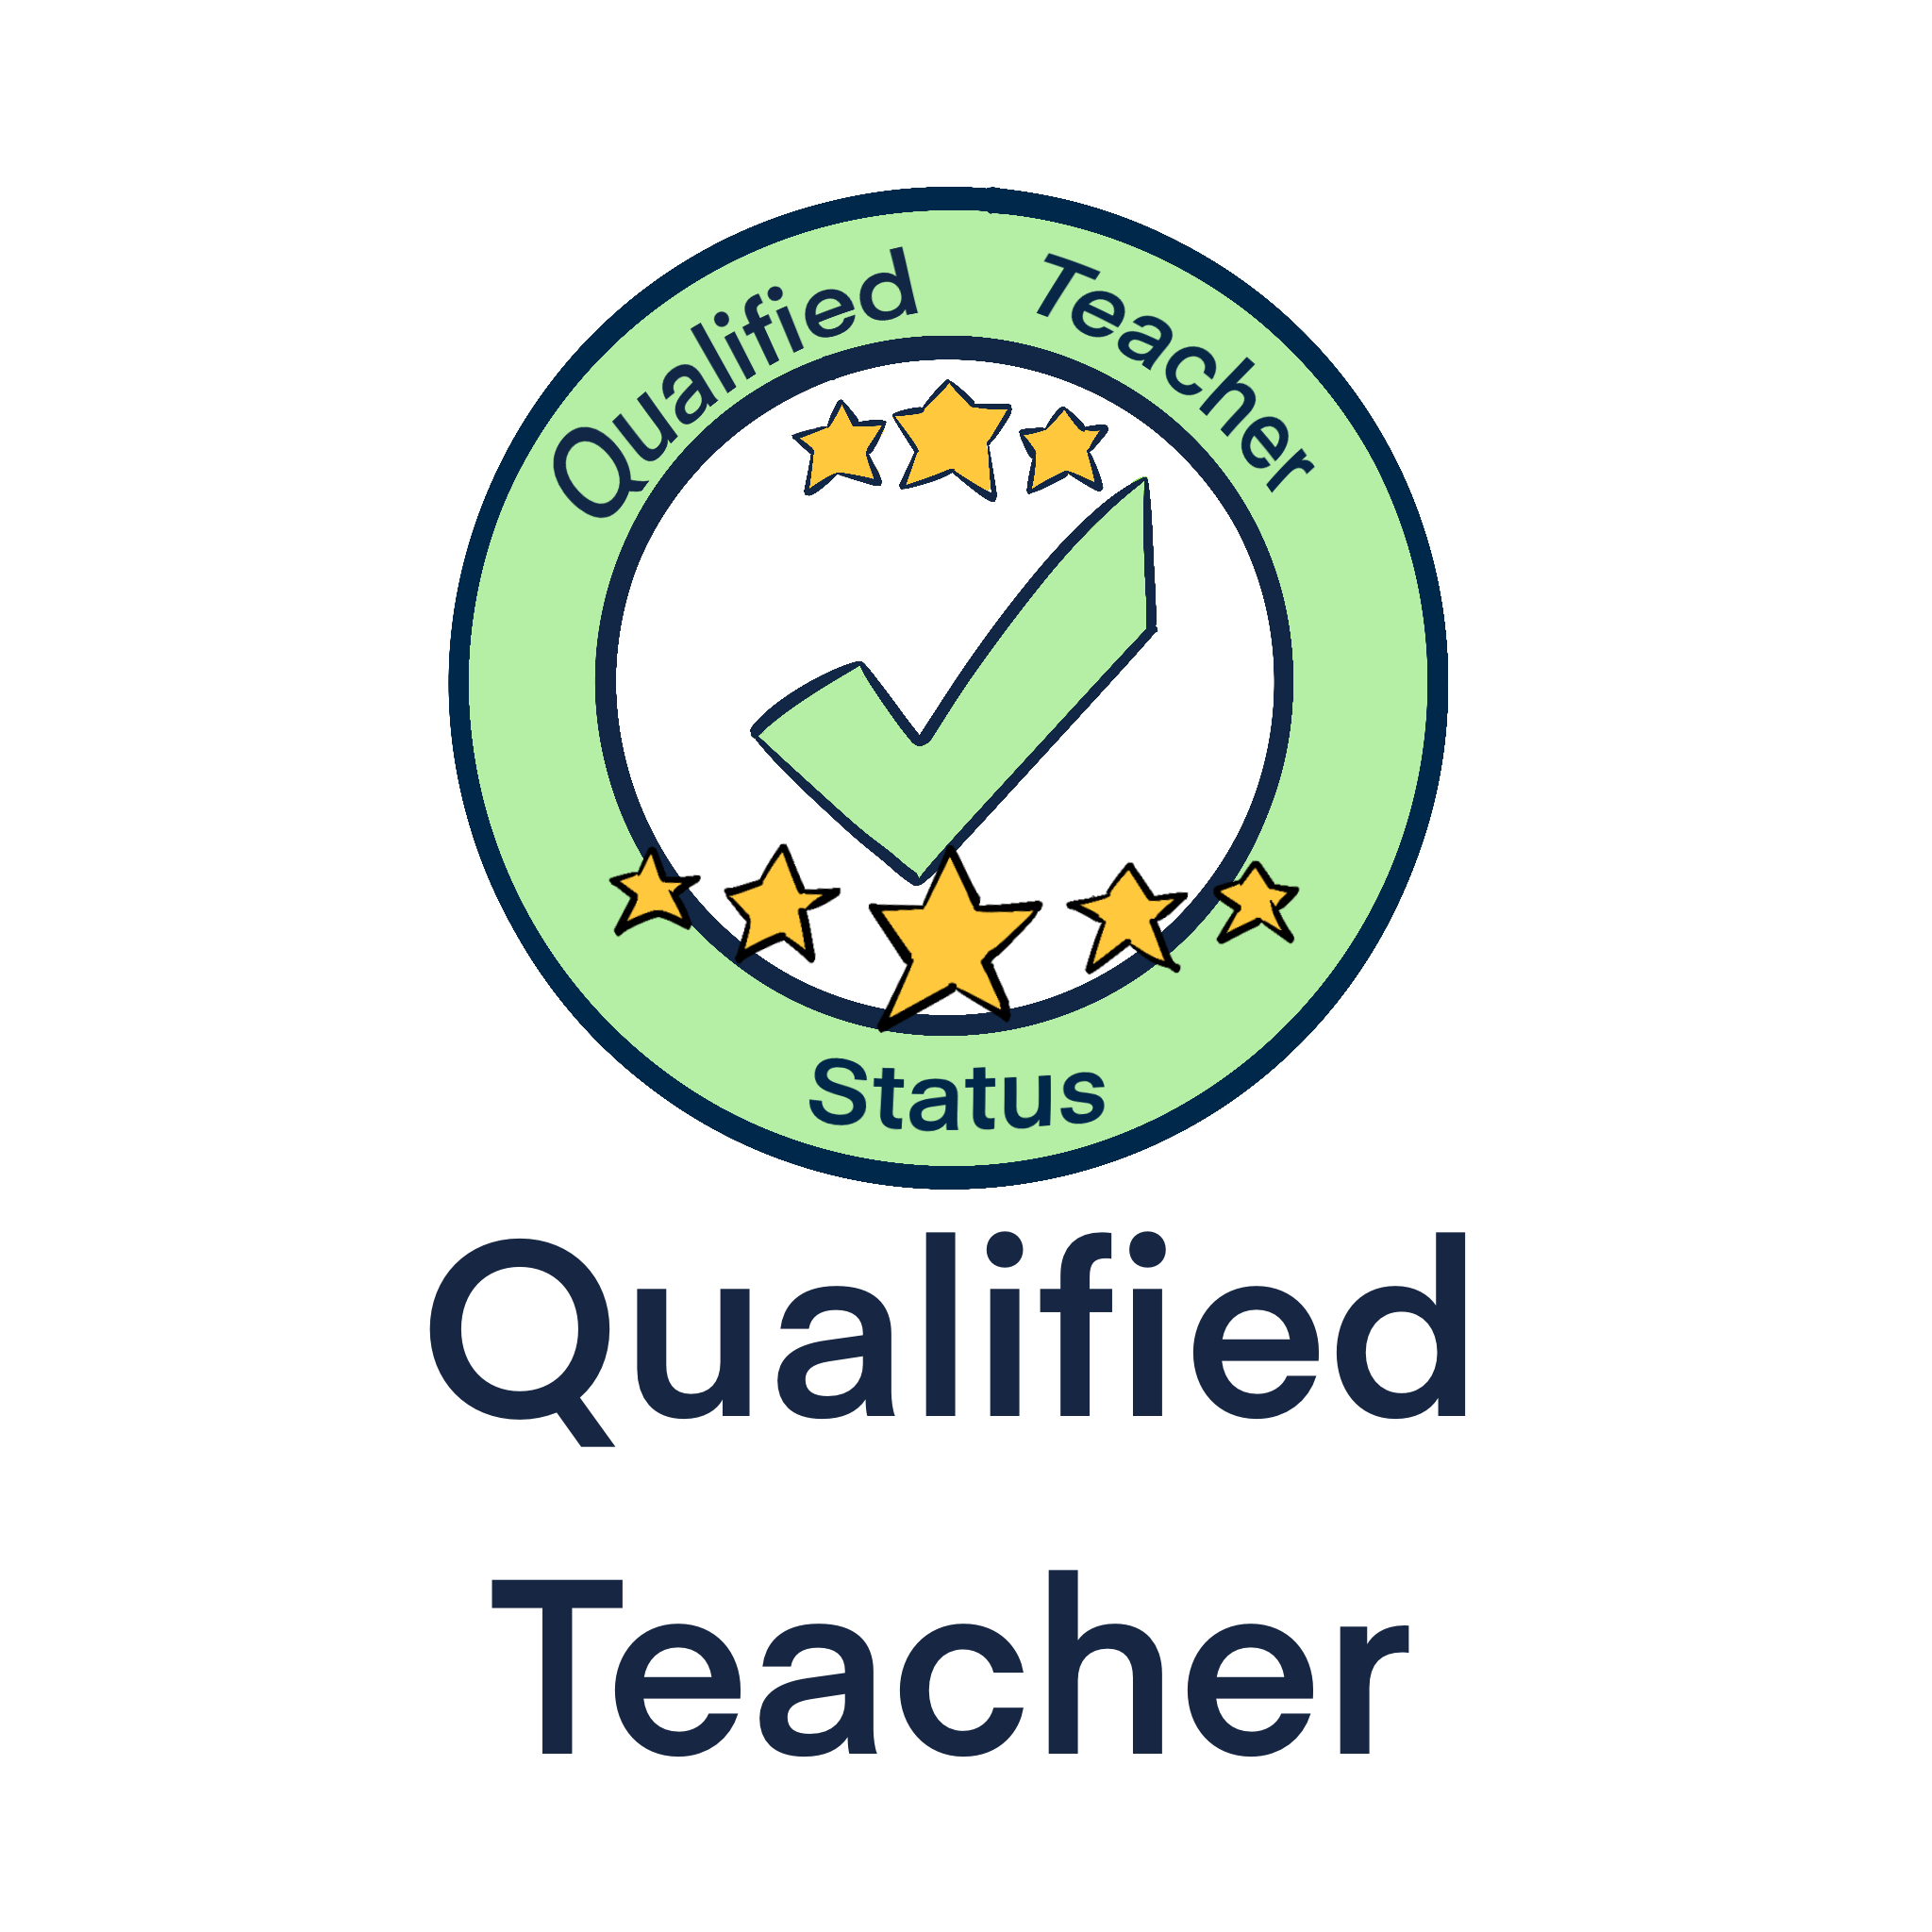 Like all our tutors, Raphael is a qualified teacher